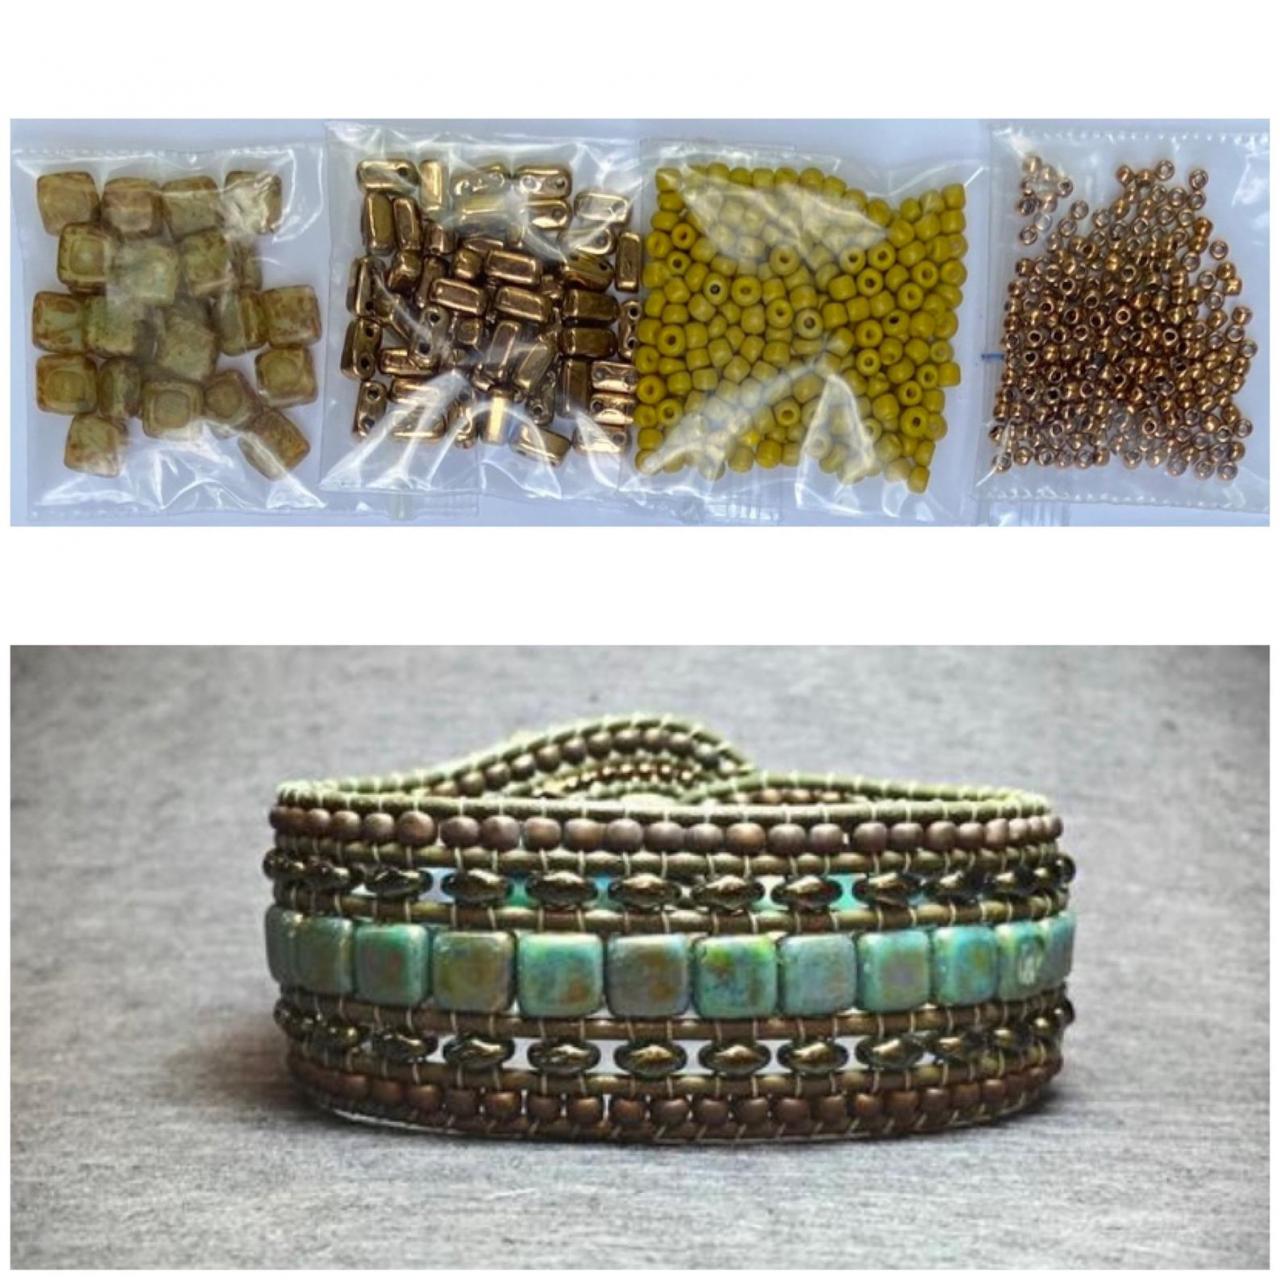 Kit Wide Leather Beaded Cuff Bonny Mustard Puce Bronze Tan Picasso Intermediate Instructions Complete No Tools #25